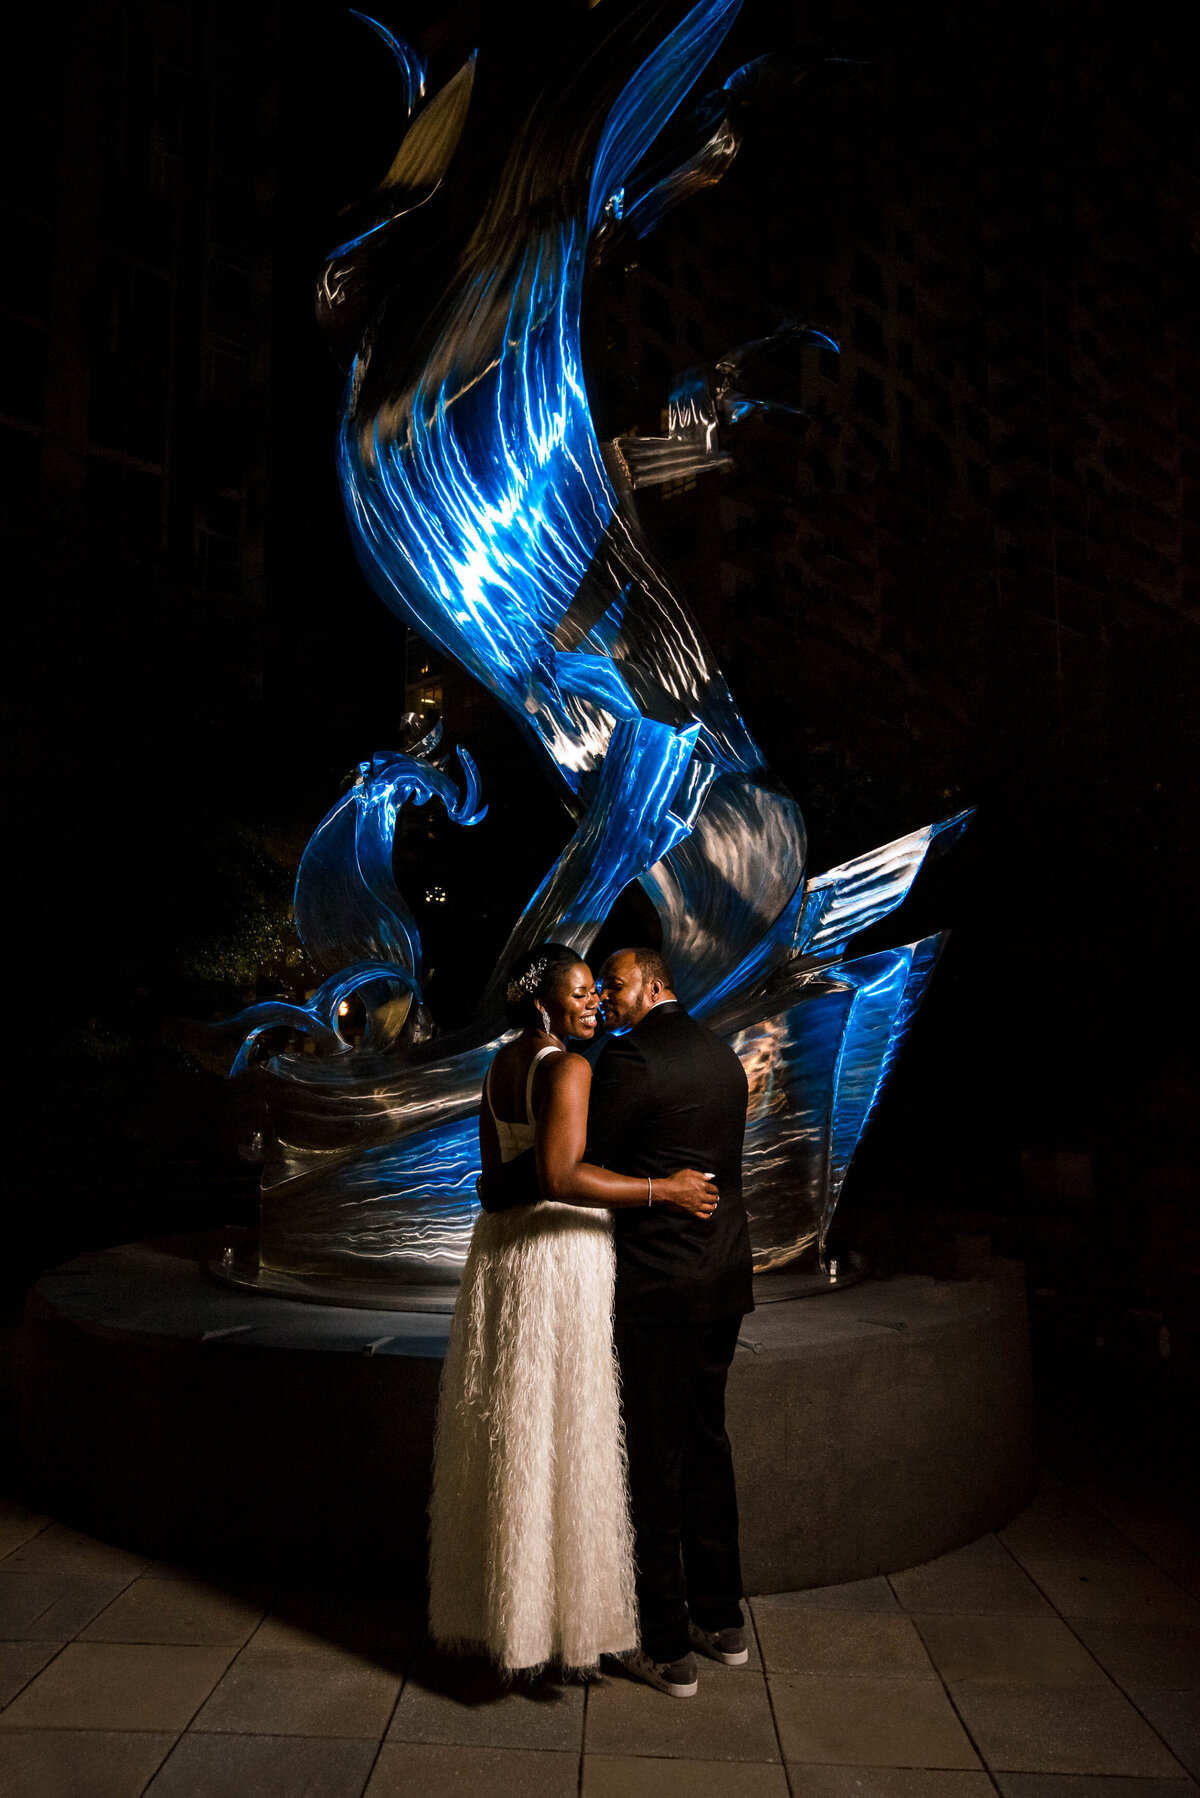 Nighttime-portrait-of-bride-and-groom-nuzzling-in-front-of-blue-lit-up-sculpture-in-Romare-Bearden-Park-in-Charlotte